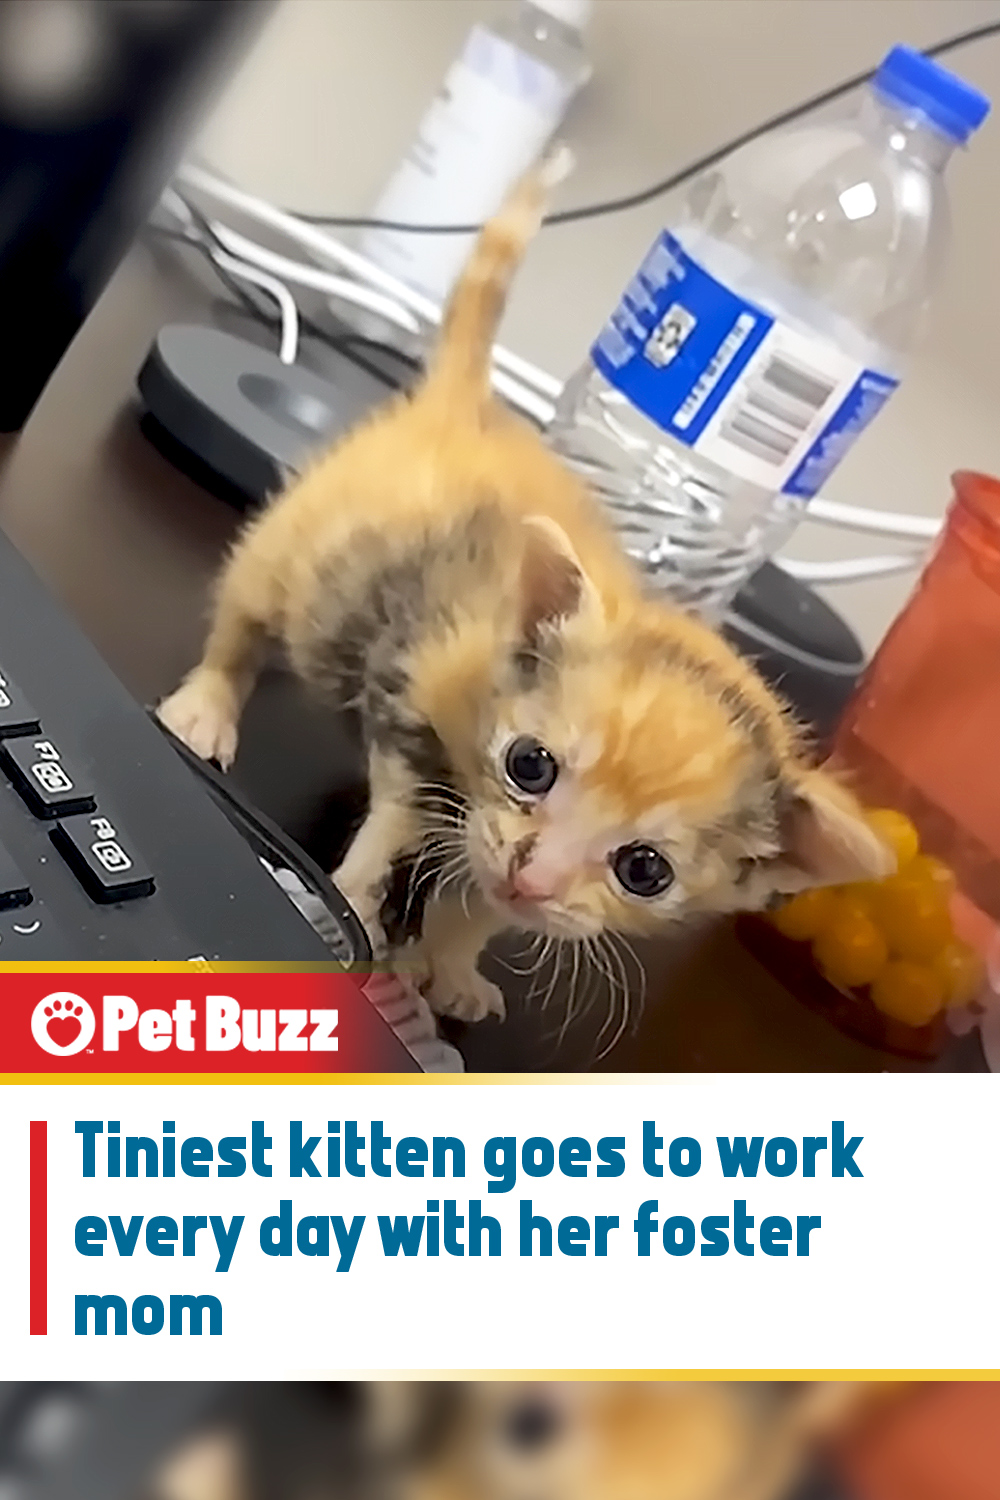 Tiniest kitten goes to work every day with her foster mom